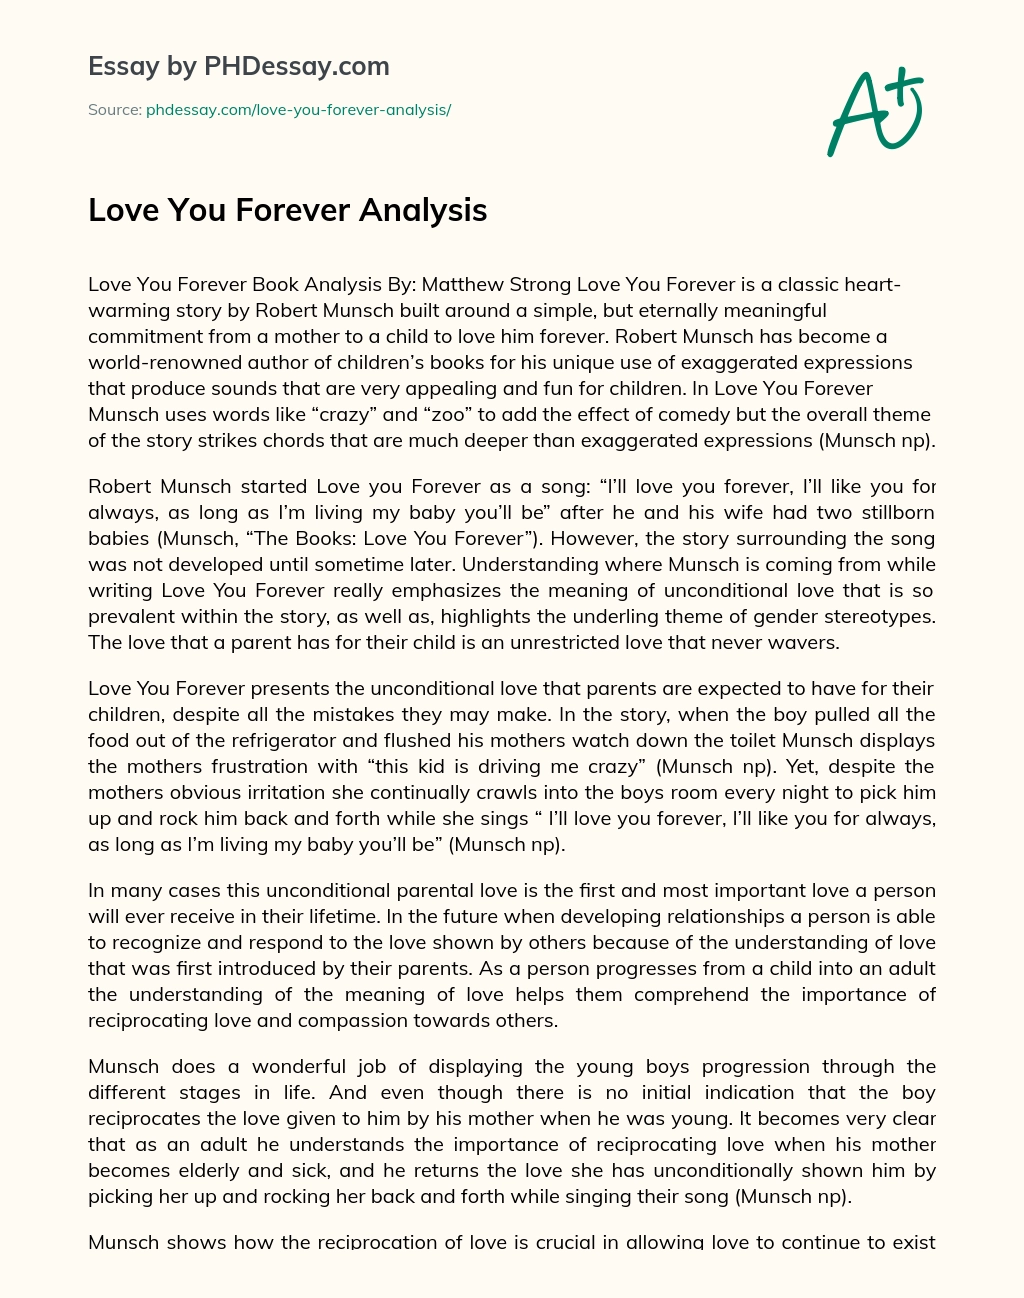 Love You Forever Analysis essay